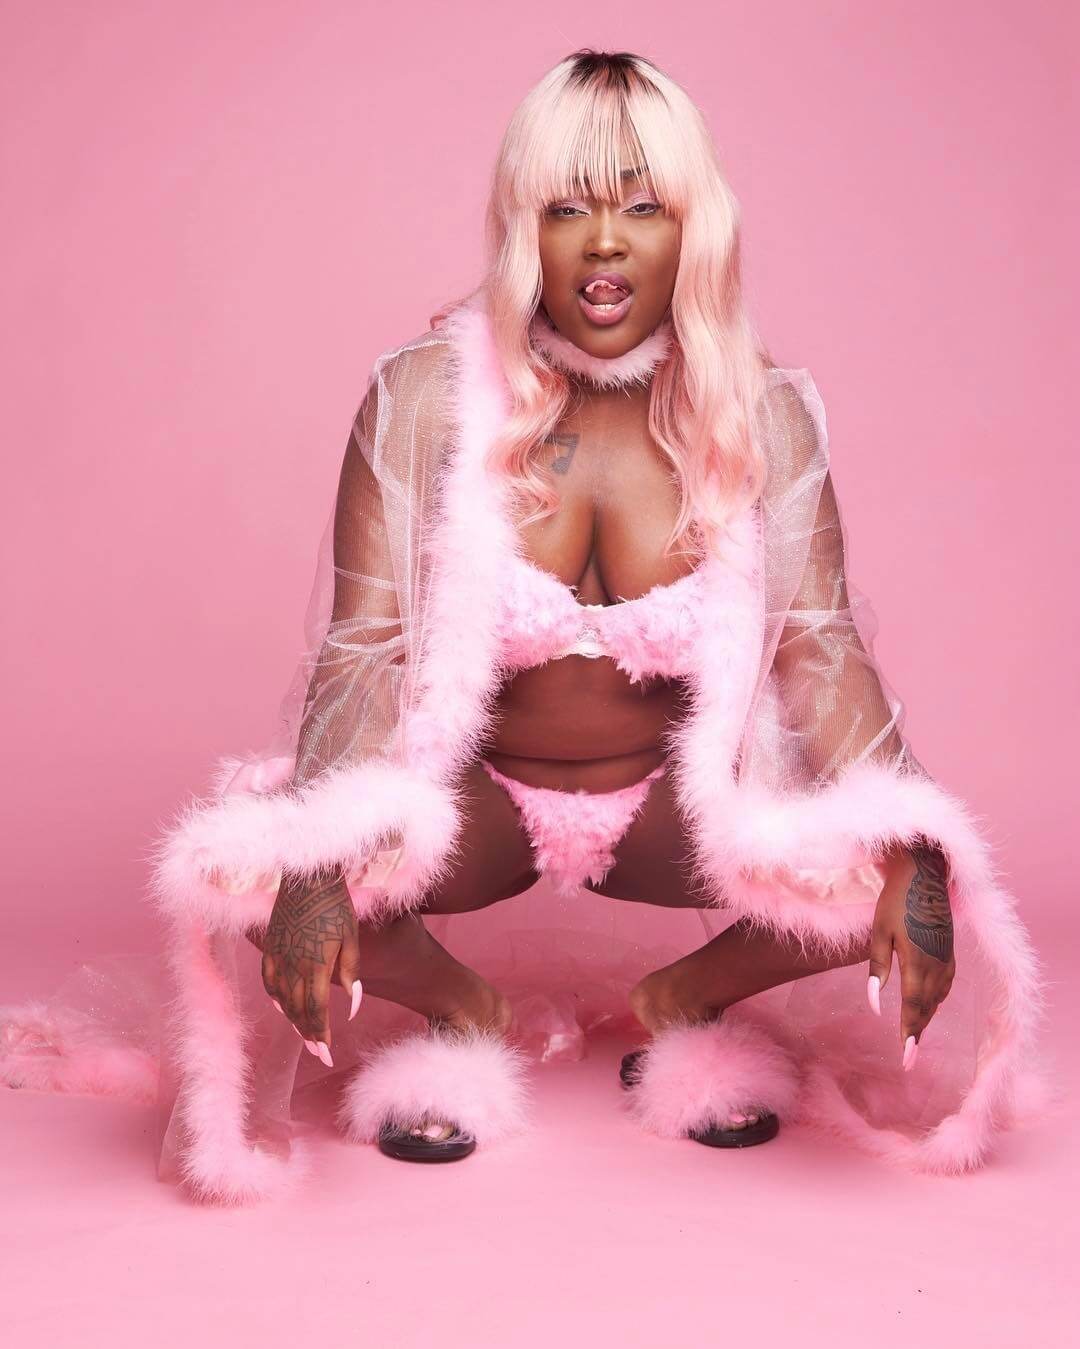 Yes, CupcakKe is a very sexy woman and CupcakKe’s bra and breast size... 